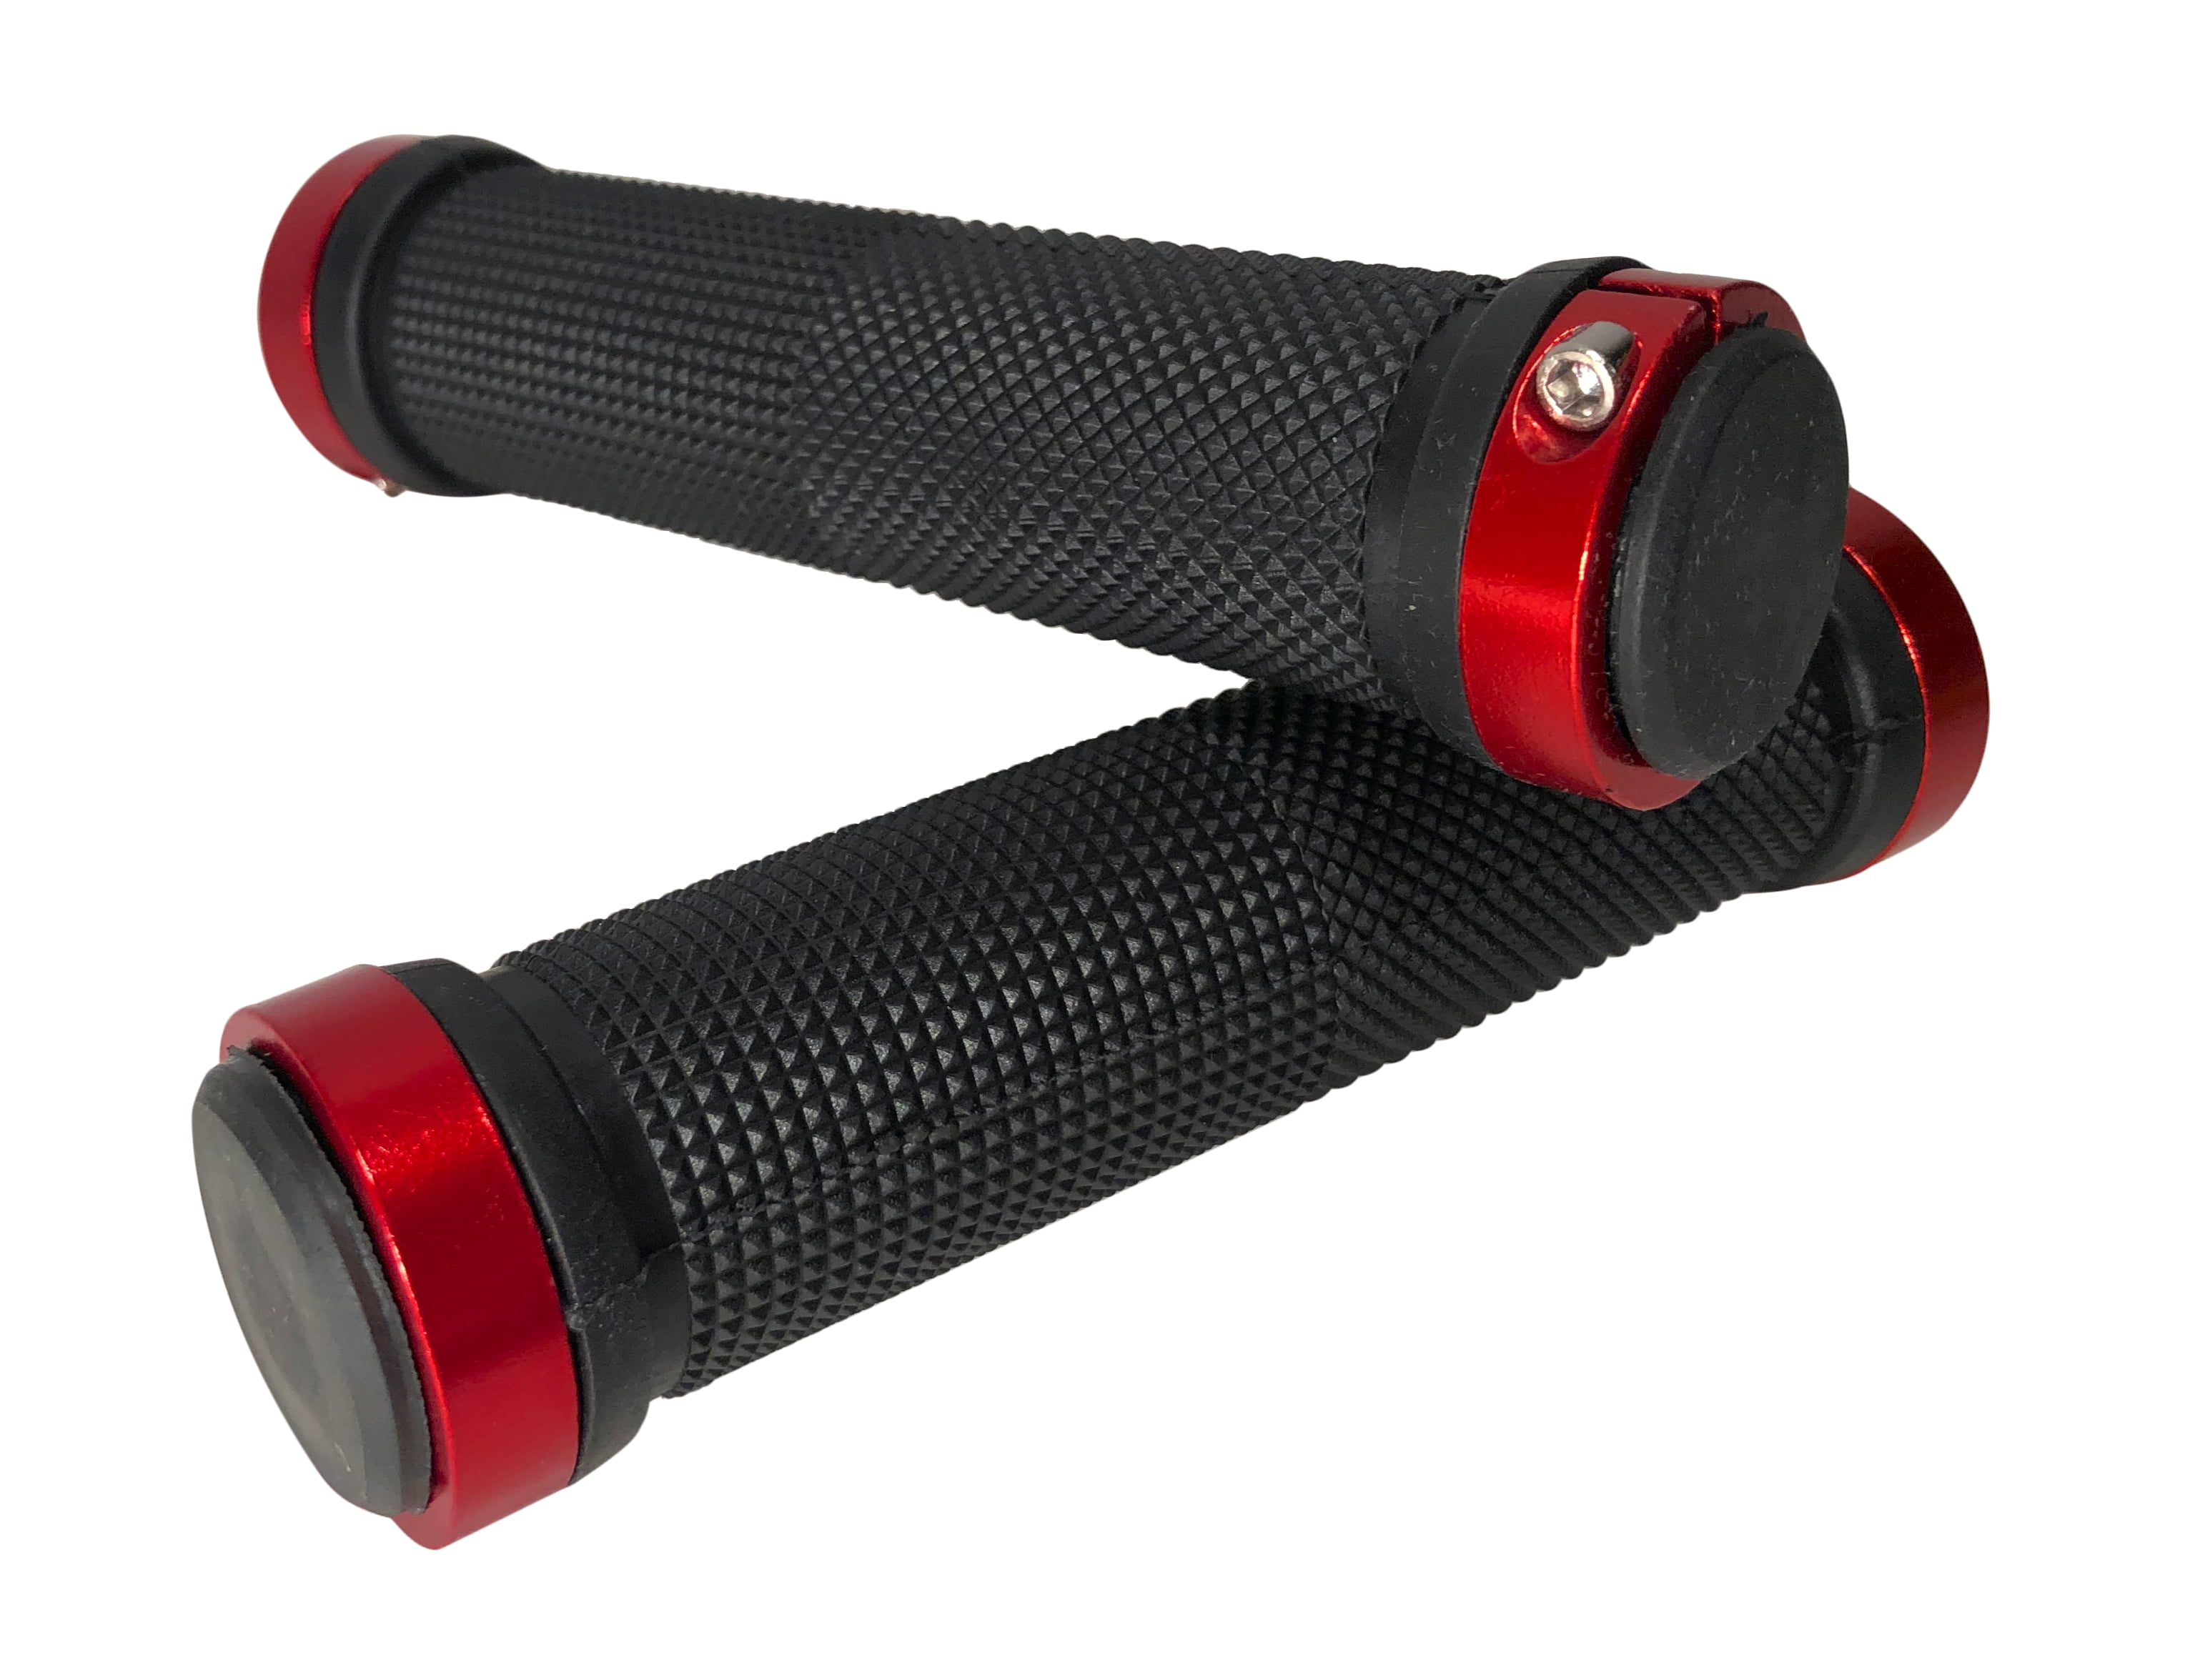 1Pair Double Lock-on Bicycle Handlebar Grips MTB BMX Fixed Gear Bike Black Red 